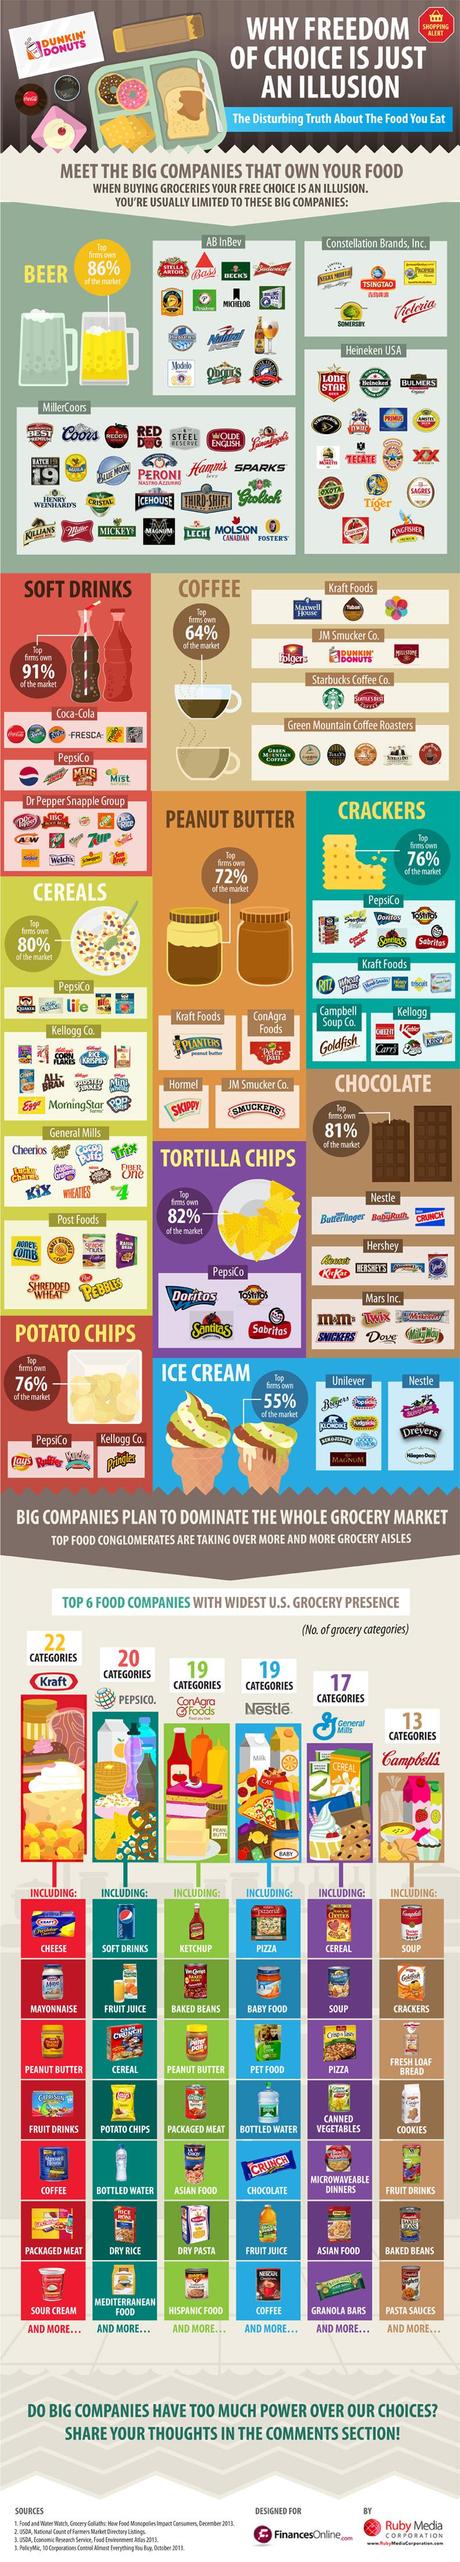 Top Grocery Brands Comparison: Latest Research On Big Food Companies Exploiting Our Shopping Habits